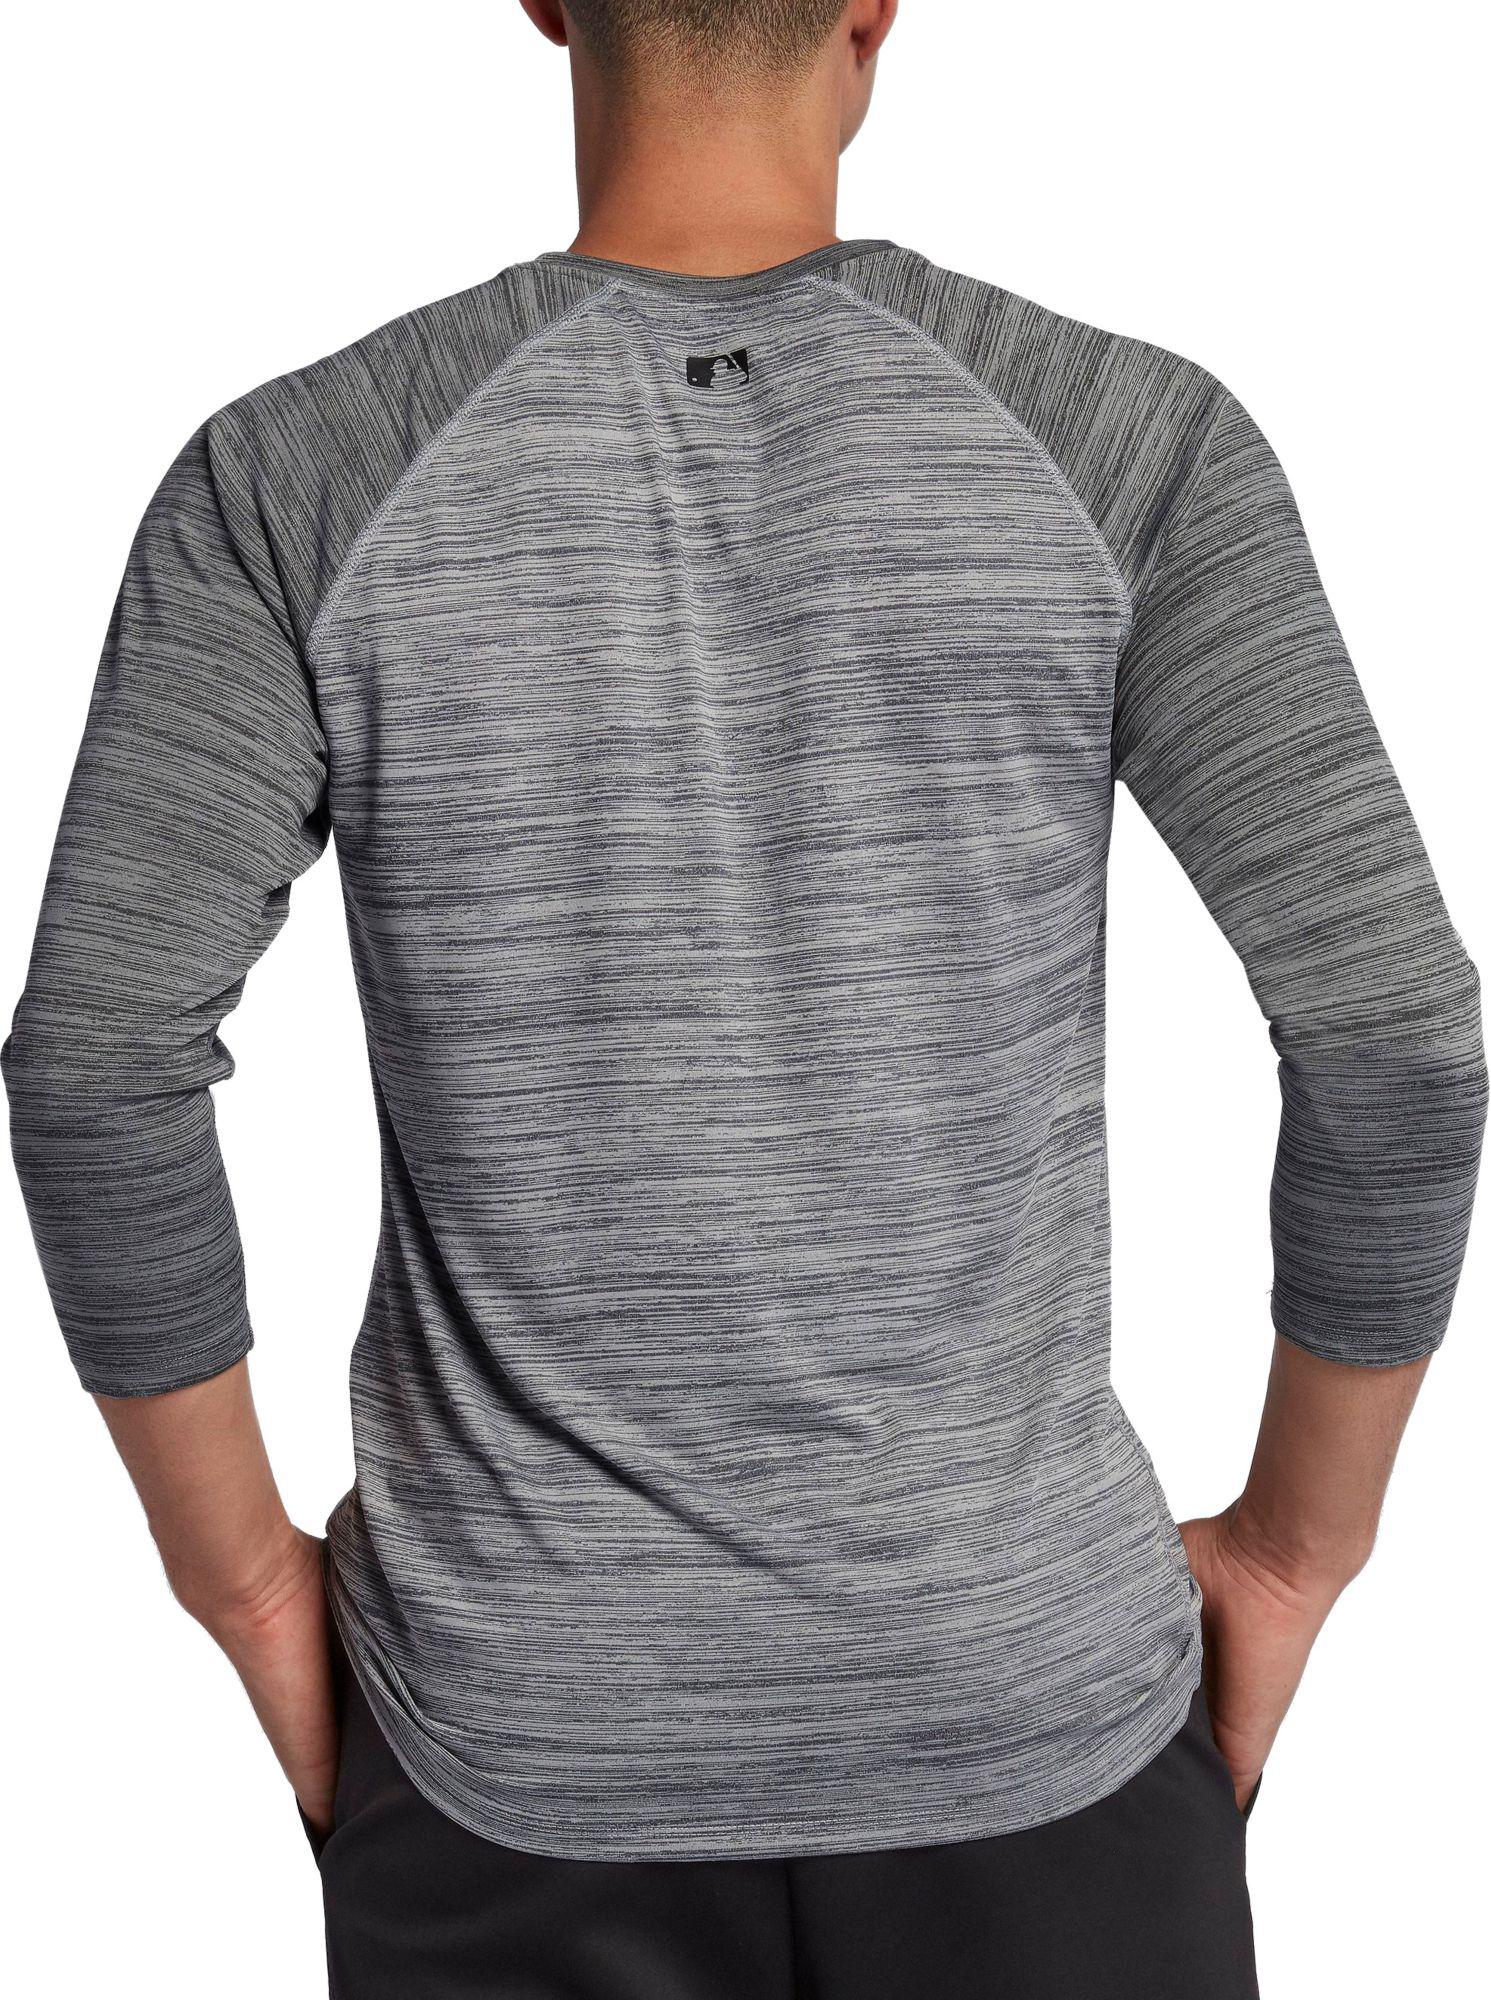 Download Nike Synthetic Dry Mlb 3/4 Sleeve Baseball T-shirt in Gray ...